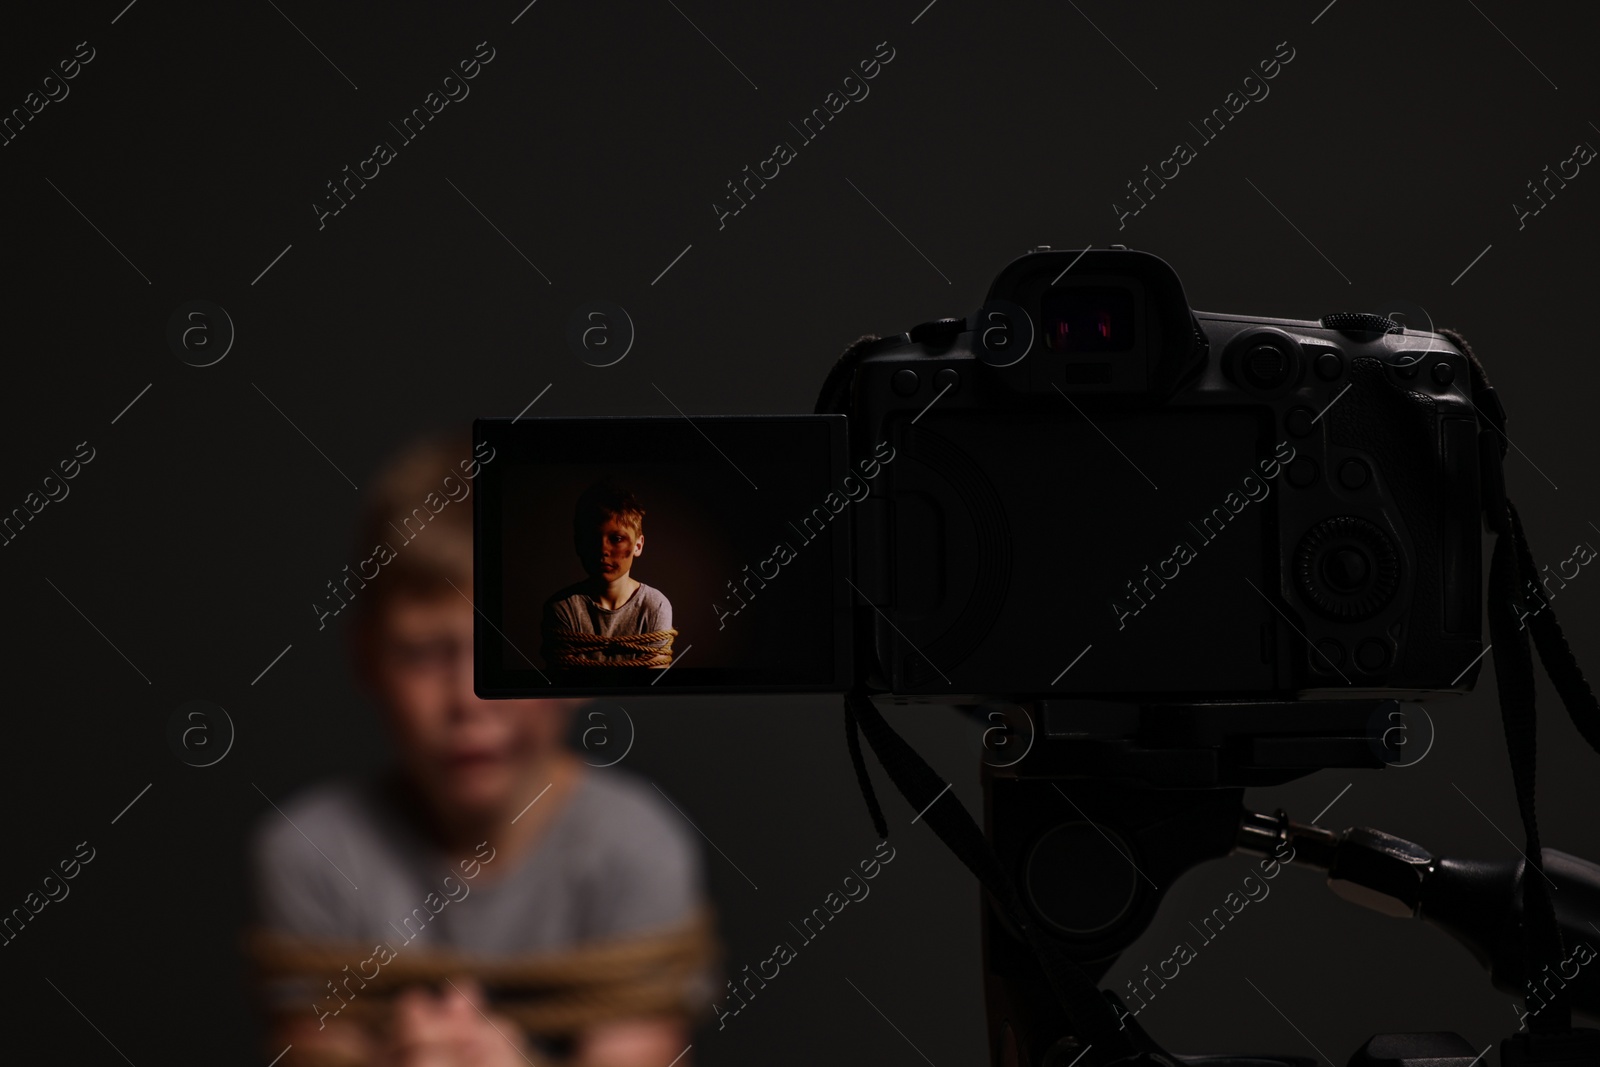 Photo of Little boy with bruises tied up and taken hostage on dark background, view through camera screen